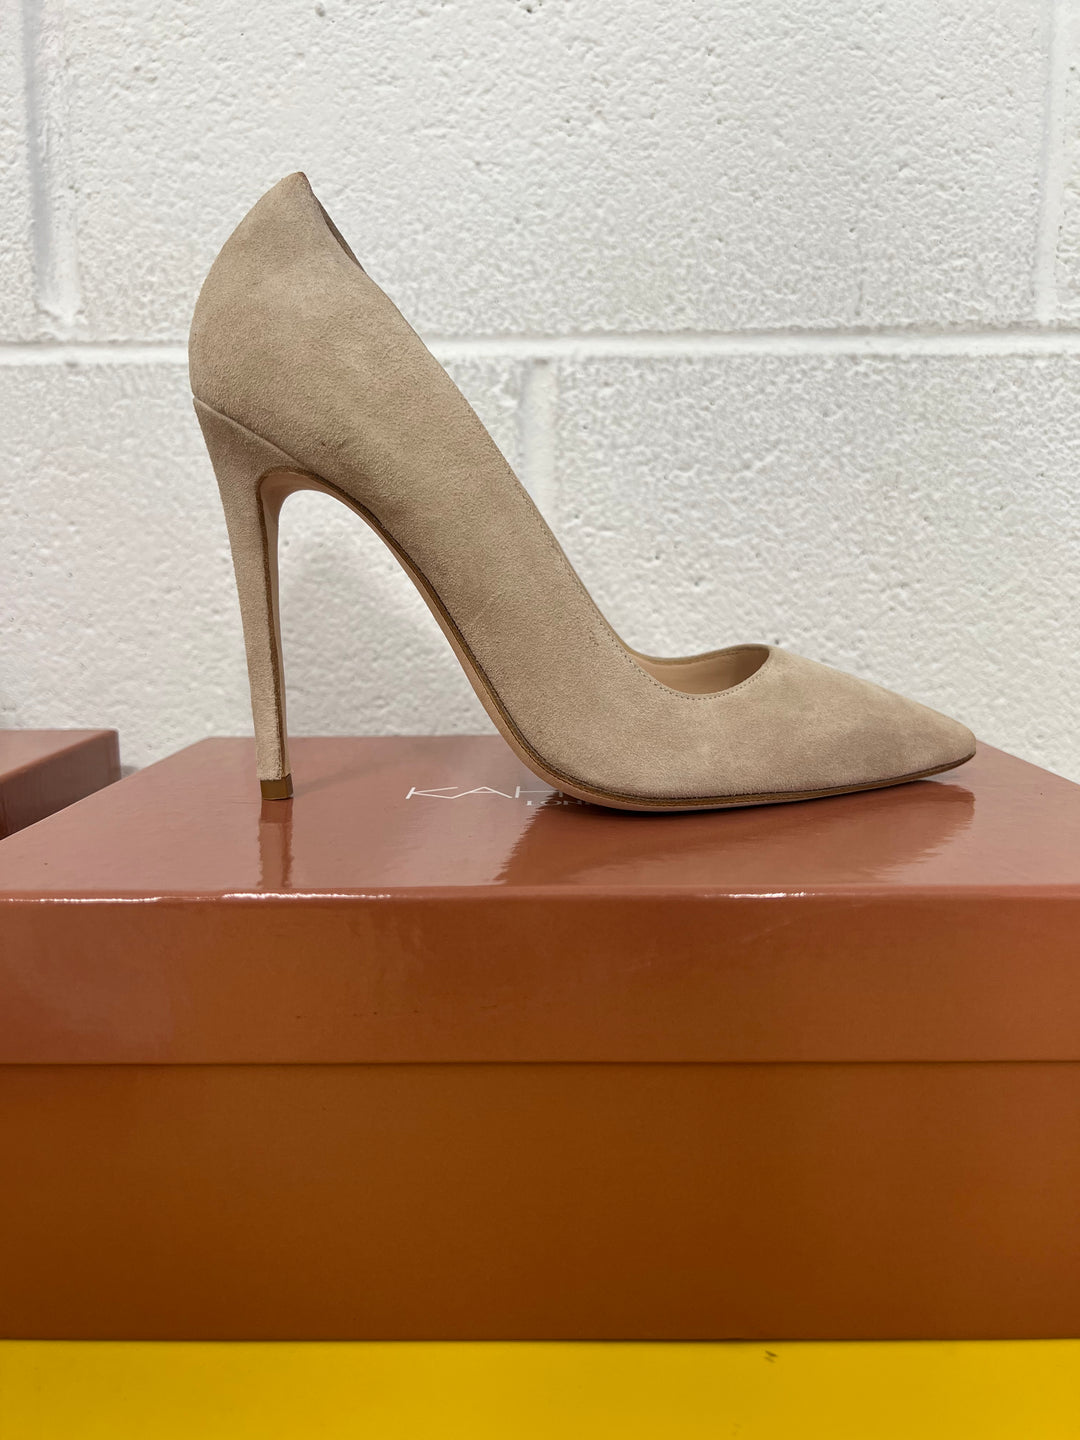 SAMPLE - Becky Pump 110mm - Taupe Suede (one off color)  - EU 39